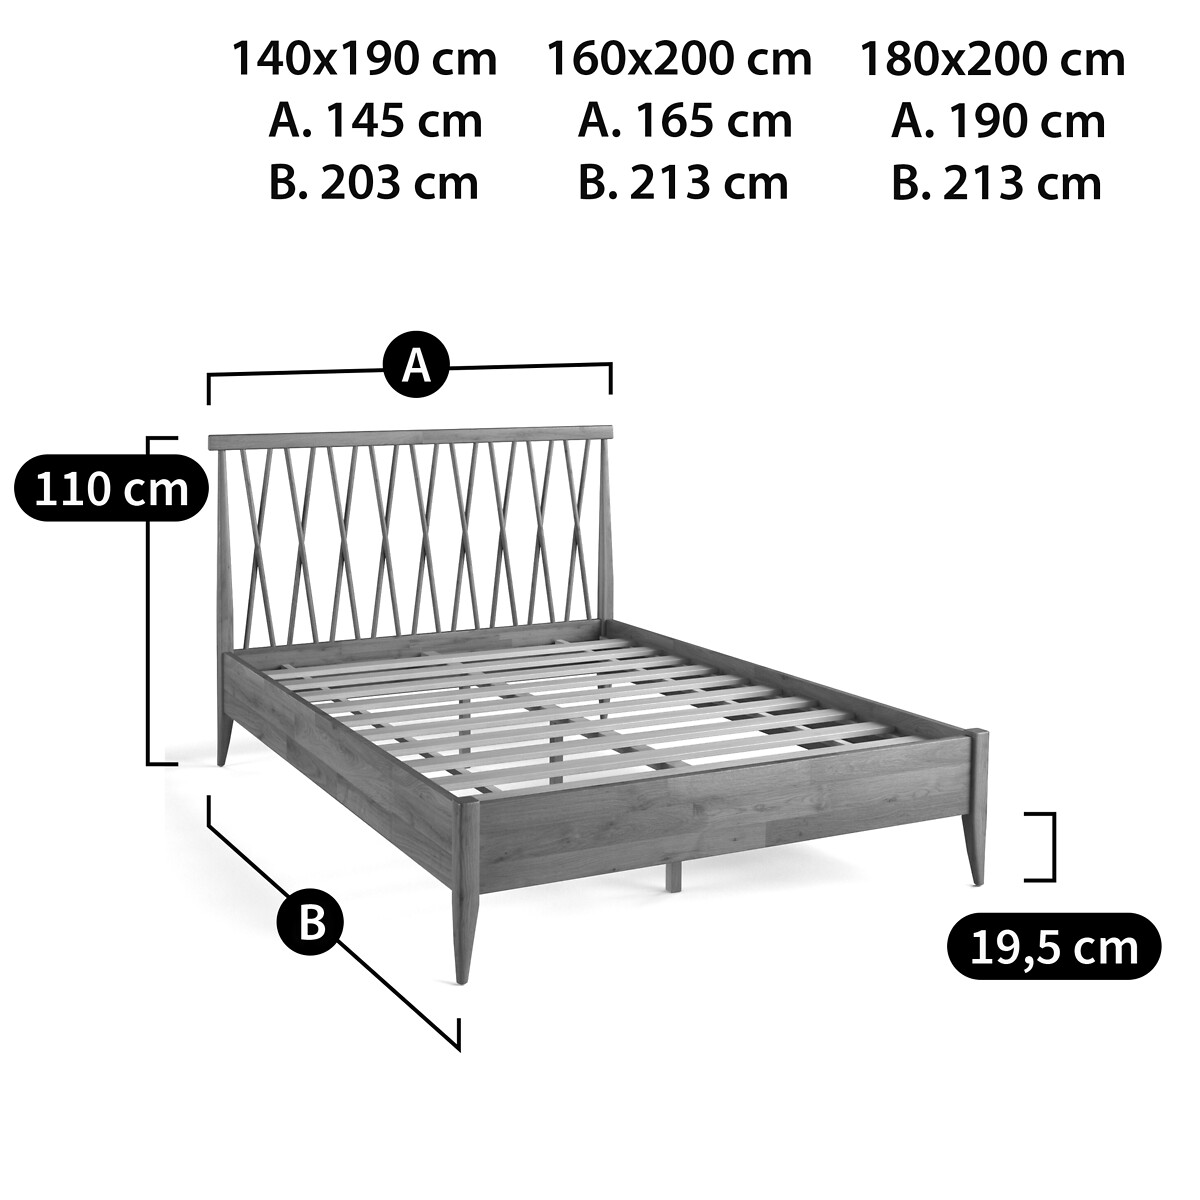 Quilda Soild Oak Bed Wood La Redoute, Simple Bed Frame King Size Dimensions In Cms